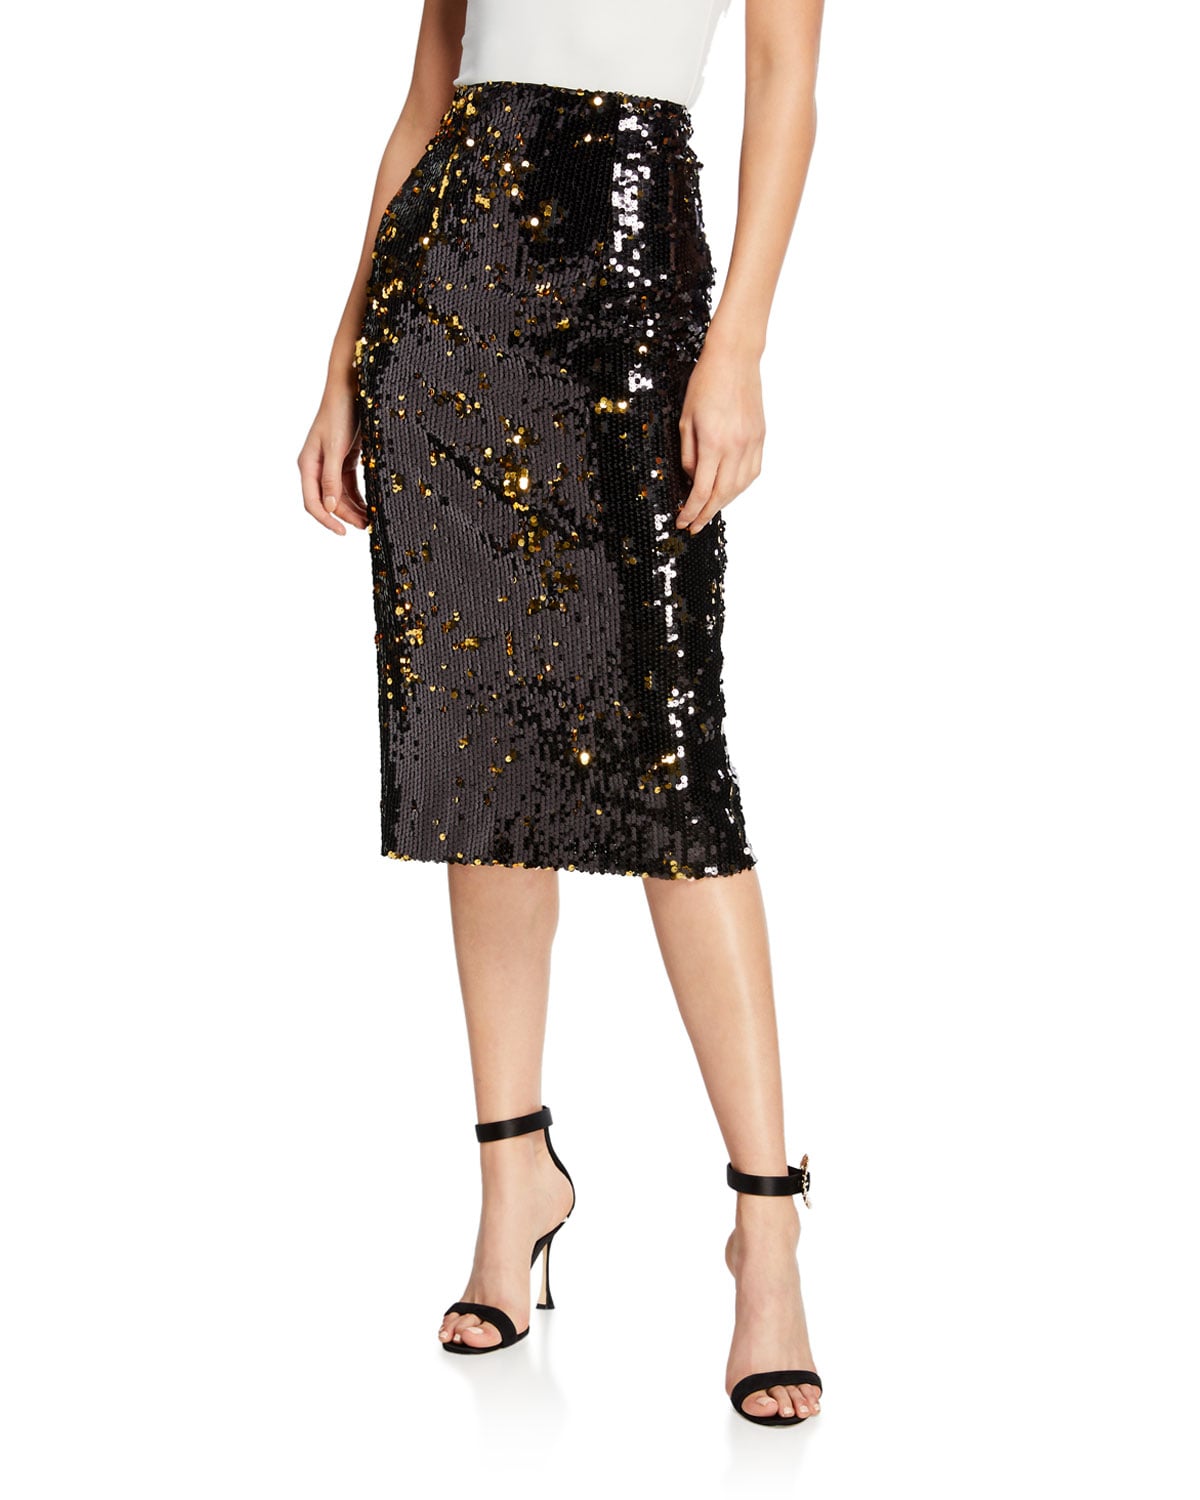 Milly Sequined Midi Pencil Skirt | Think Sequins Aren't Work-Appropriate?  Check Out These Smart Outfit Ideas | POPSUGAR Fashion Photo 24